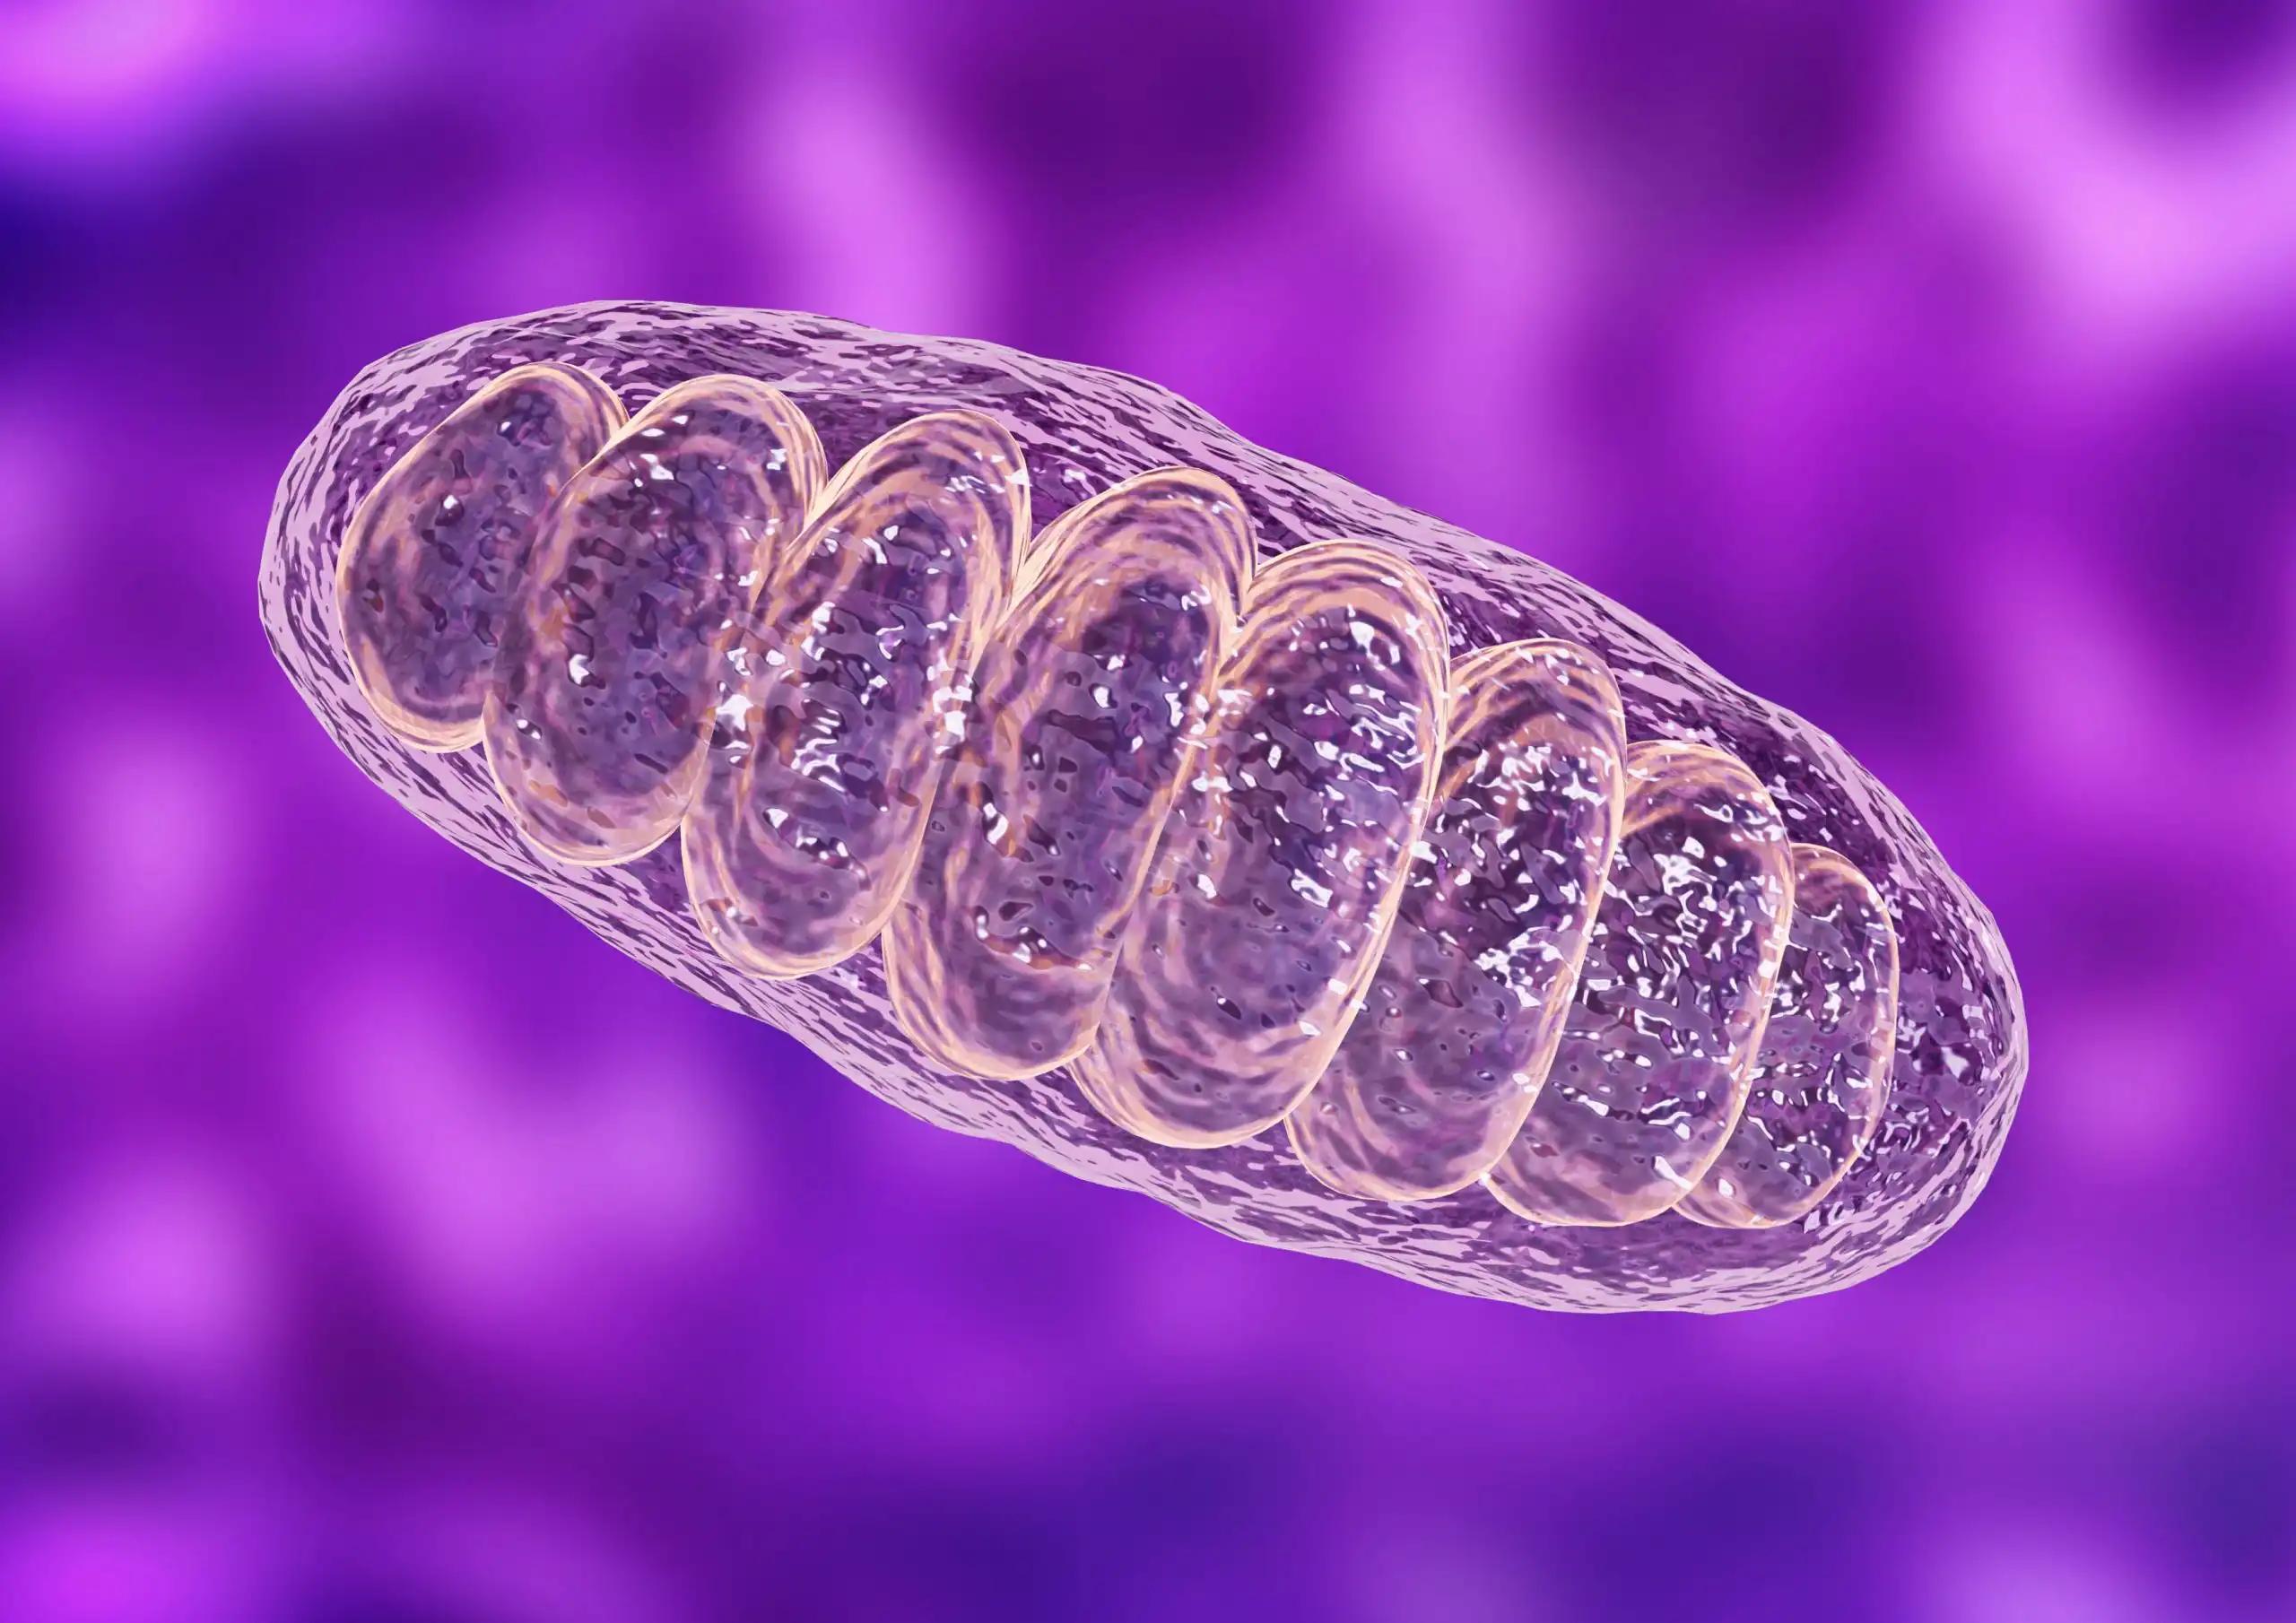 Organelles Within Eukaryotes, Focus on Mitochondria